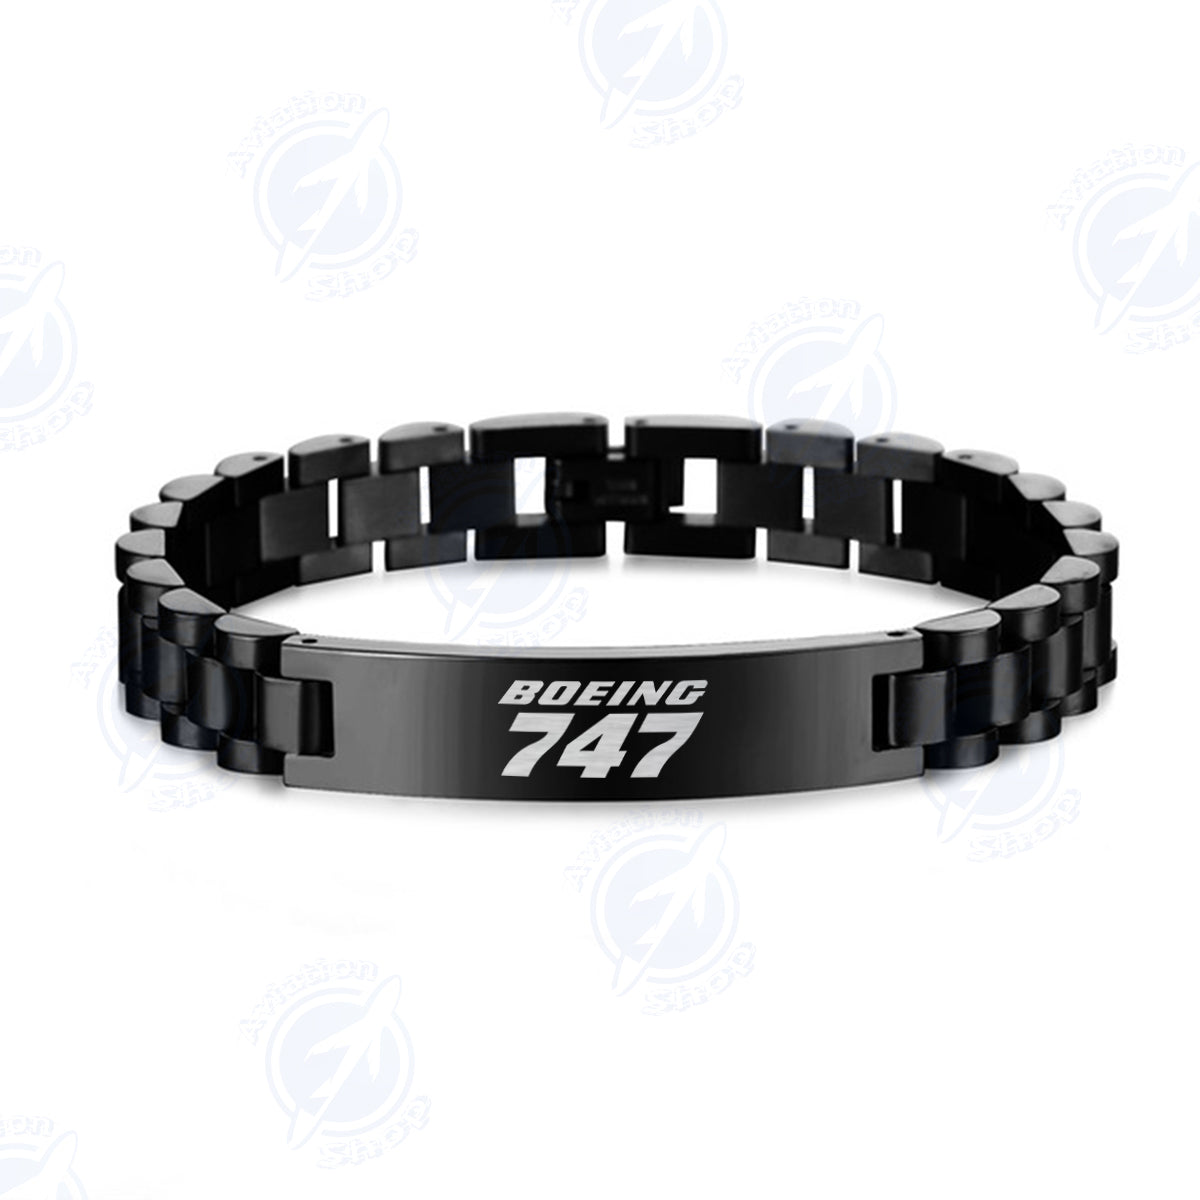 Boeing 747 & Text Designed Stainless Steel Chain Bracelets